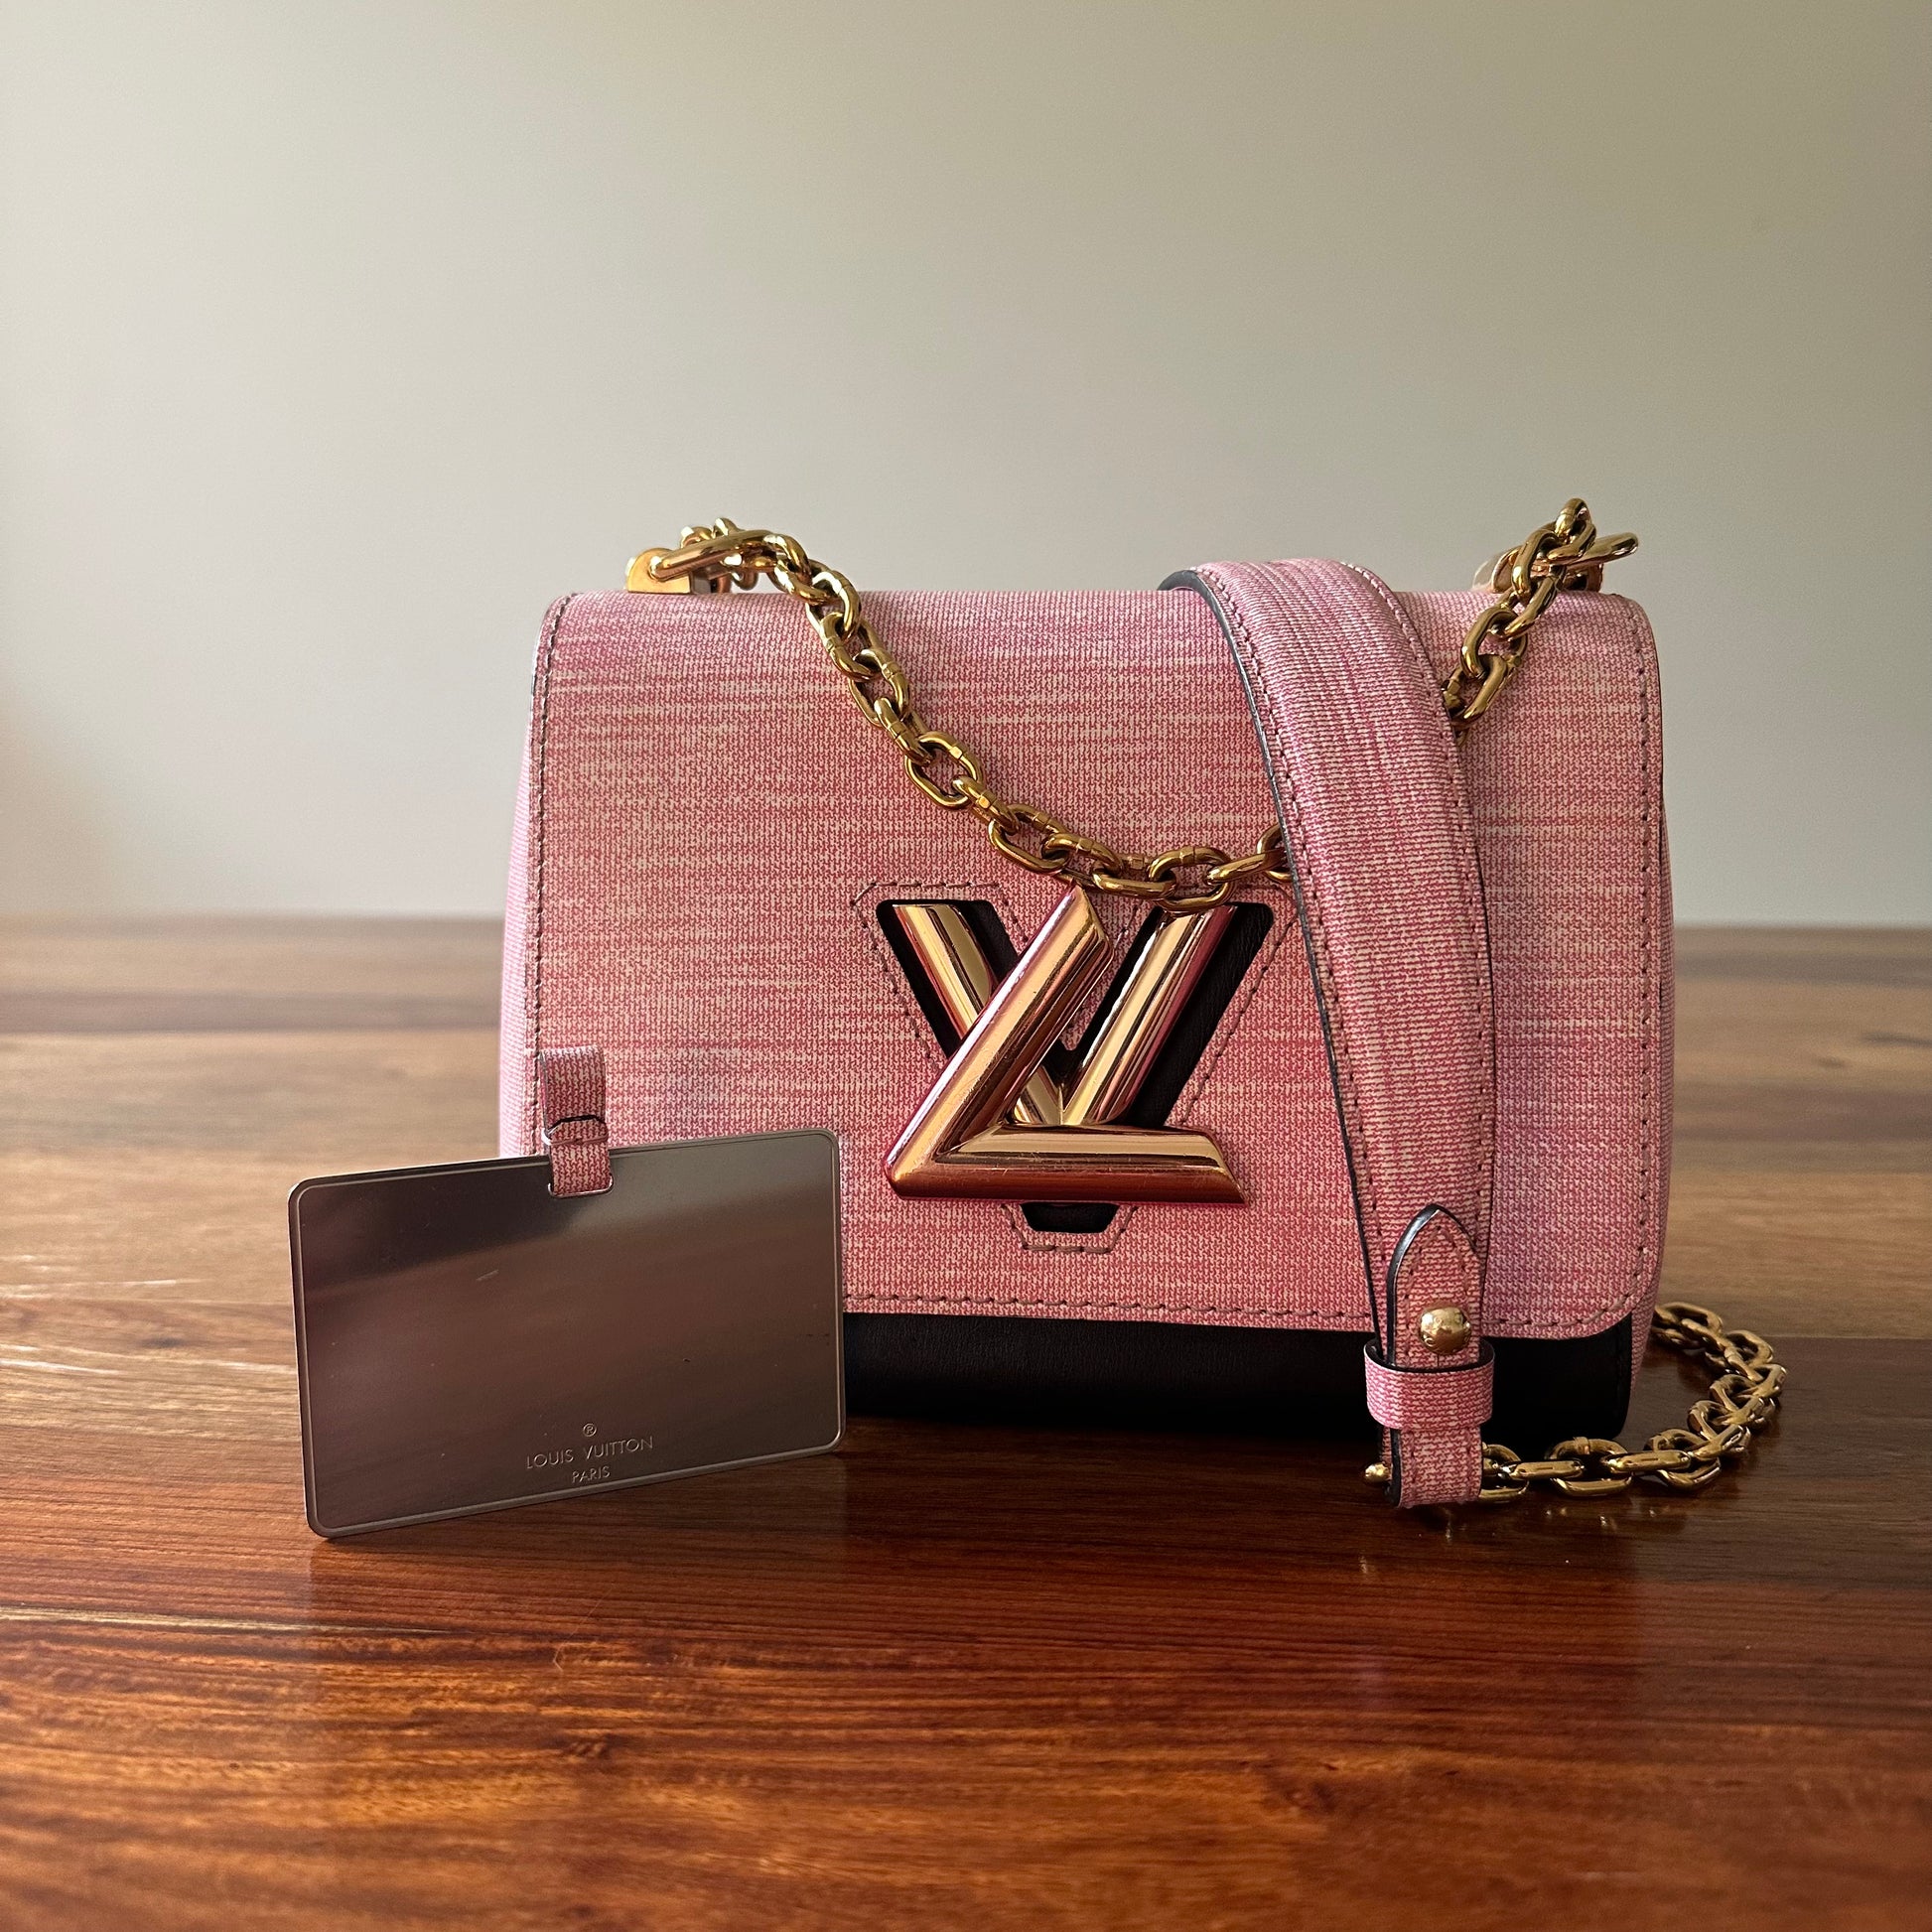 Louis Vuitton Limited Edition Twist PM Bag – Luxe Marché India